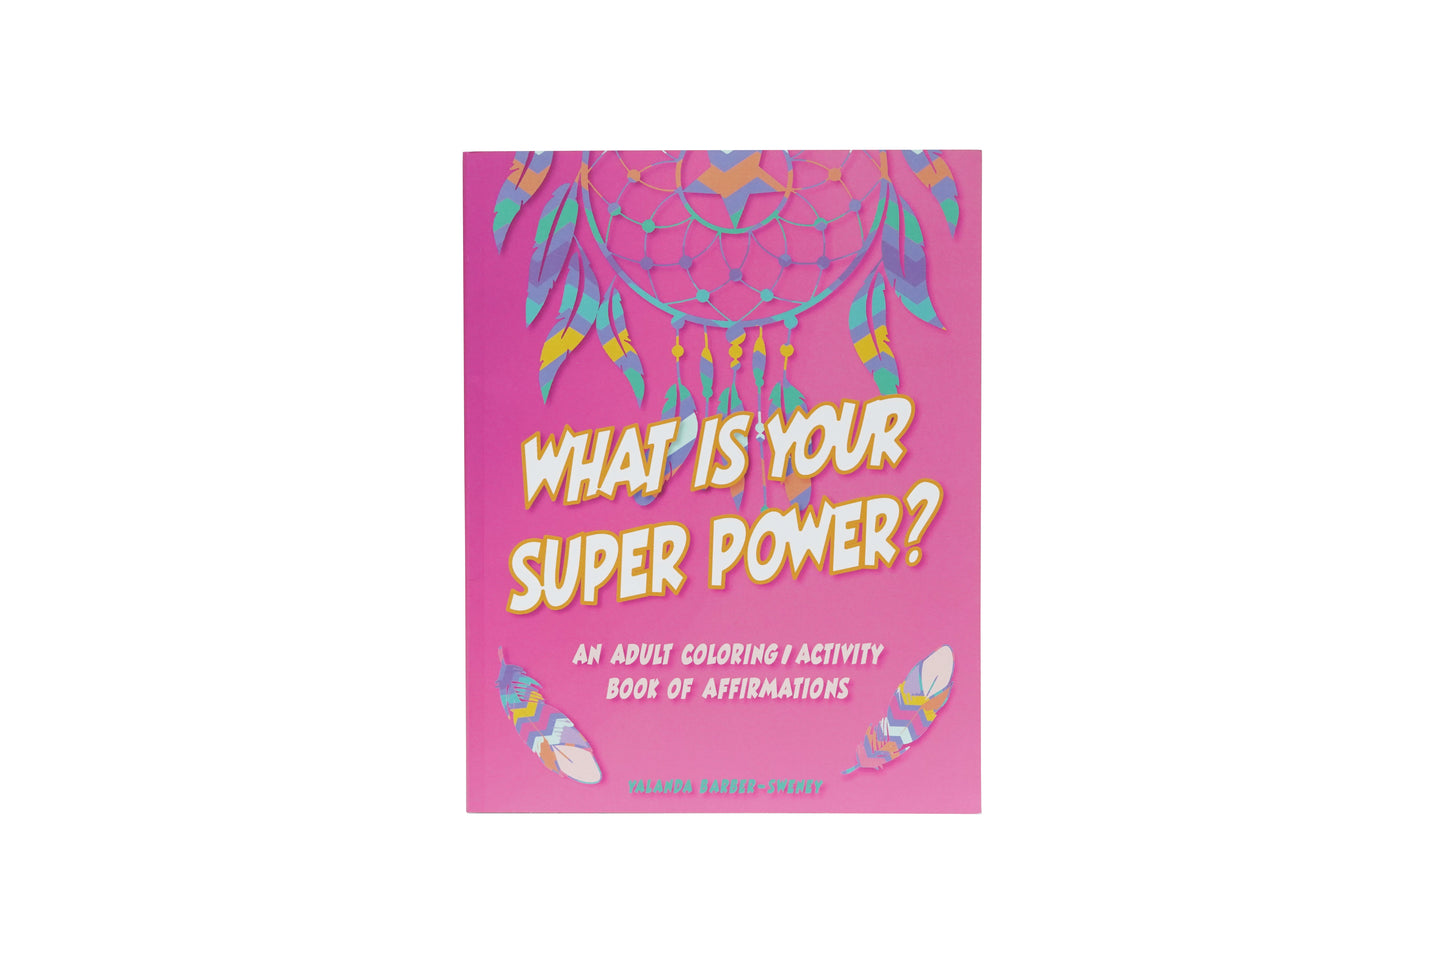 What is Your Super Power? An Adult Coloring/Activity Book of Affirmations: